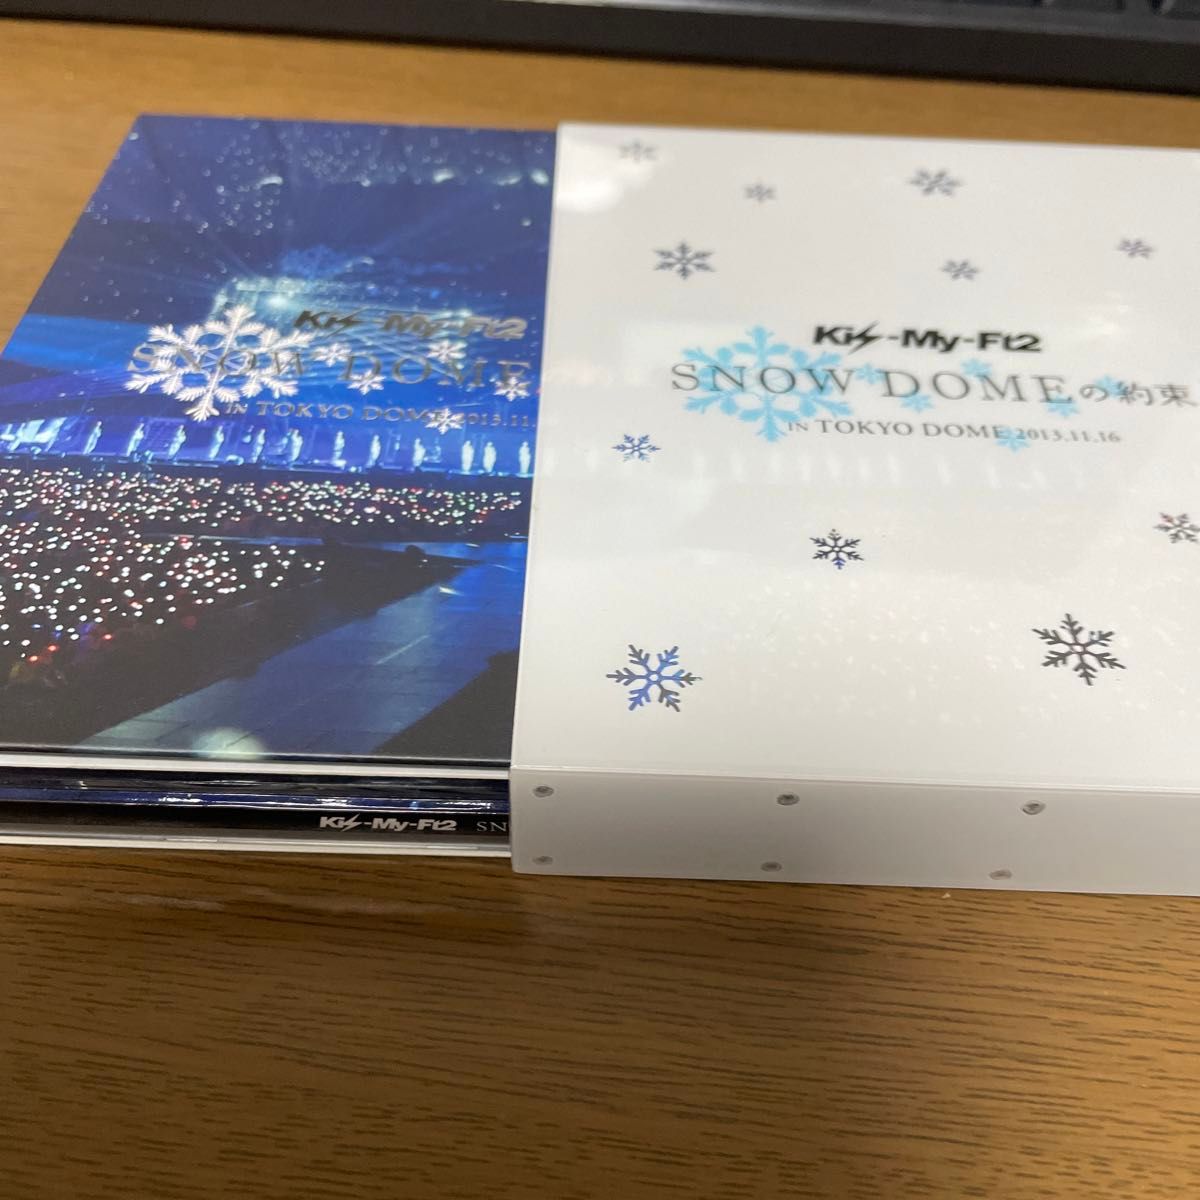 ☆ Kis-My-Ft2 SNOW DOMEの約束 IN TOKYO DOME (初回生産限定盤) DVD◆B